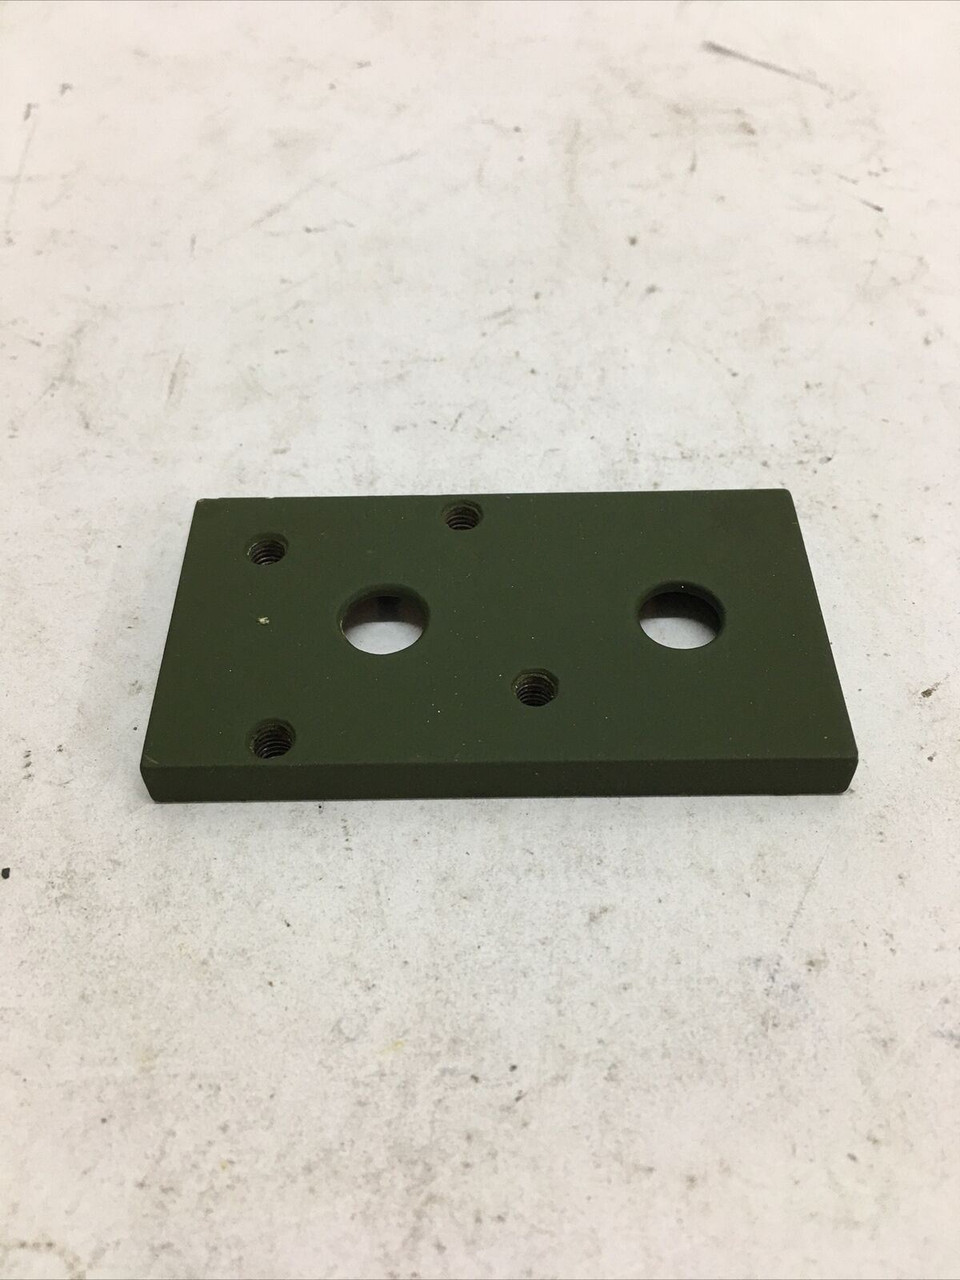 Pry Bar Keeper Mounting Plate AC86104-30 Armatec OD Green